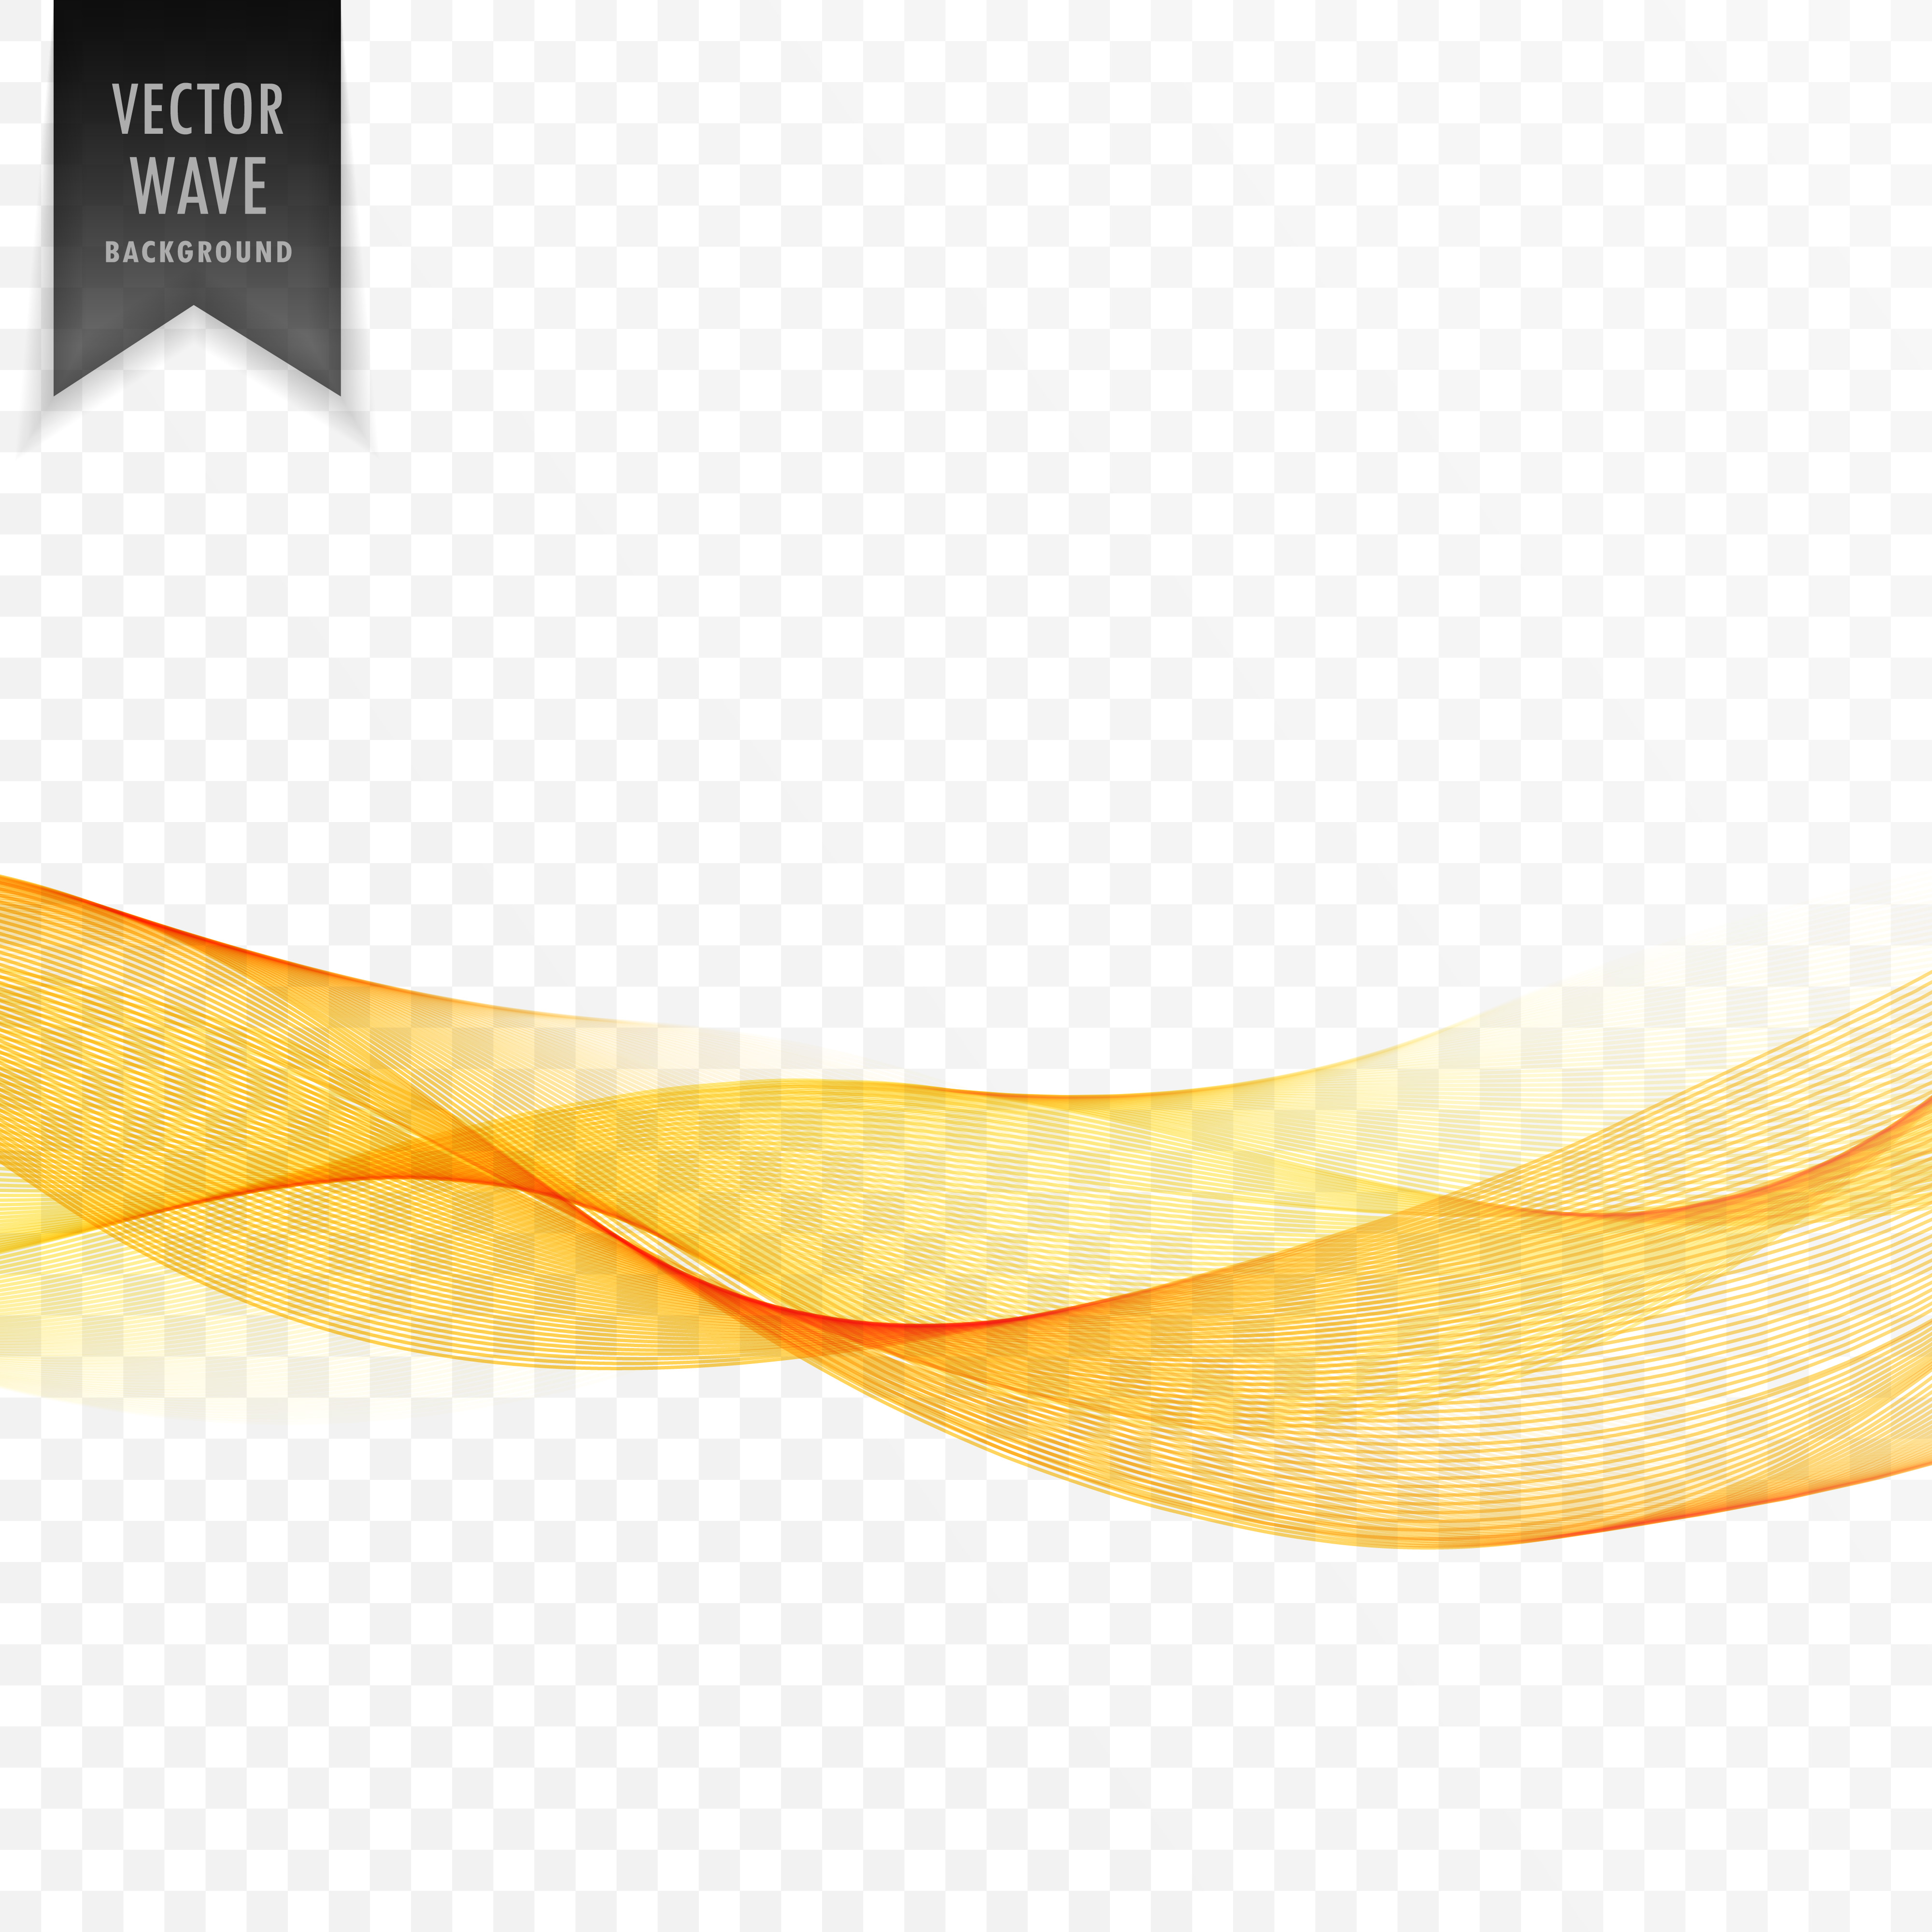 Abstract Shapes Free Vector Art - (26142 Free Downloads)